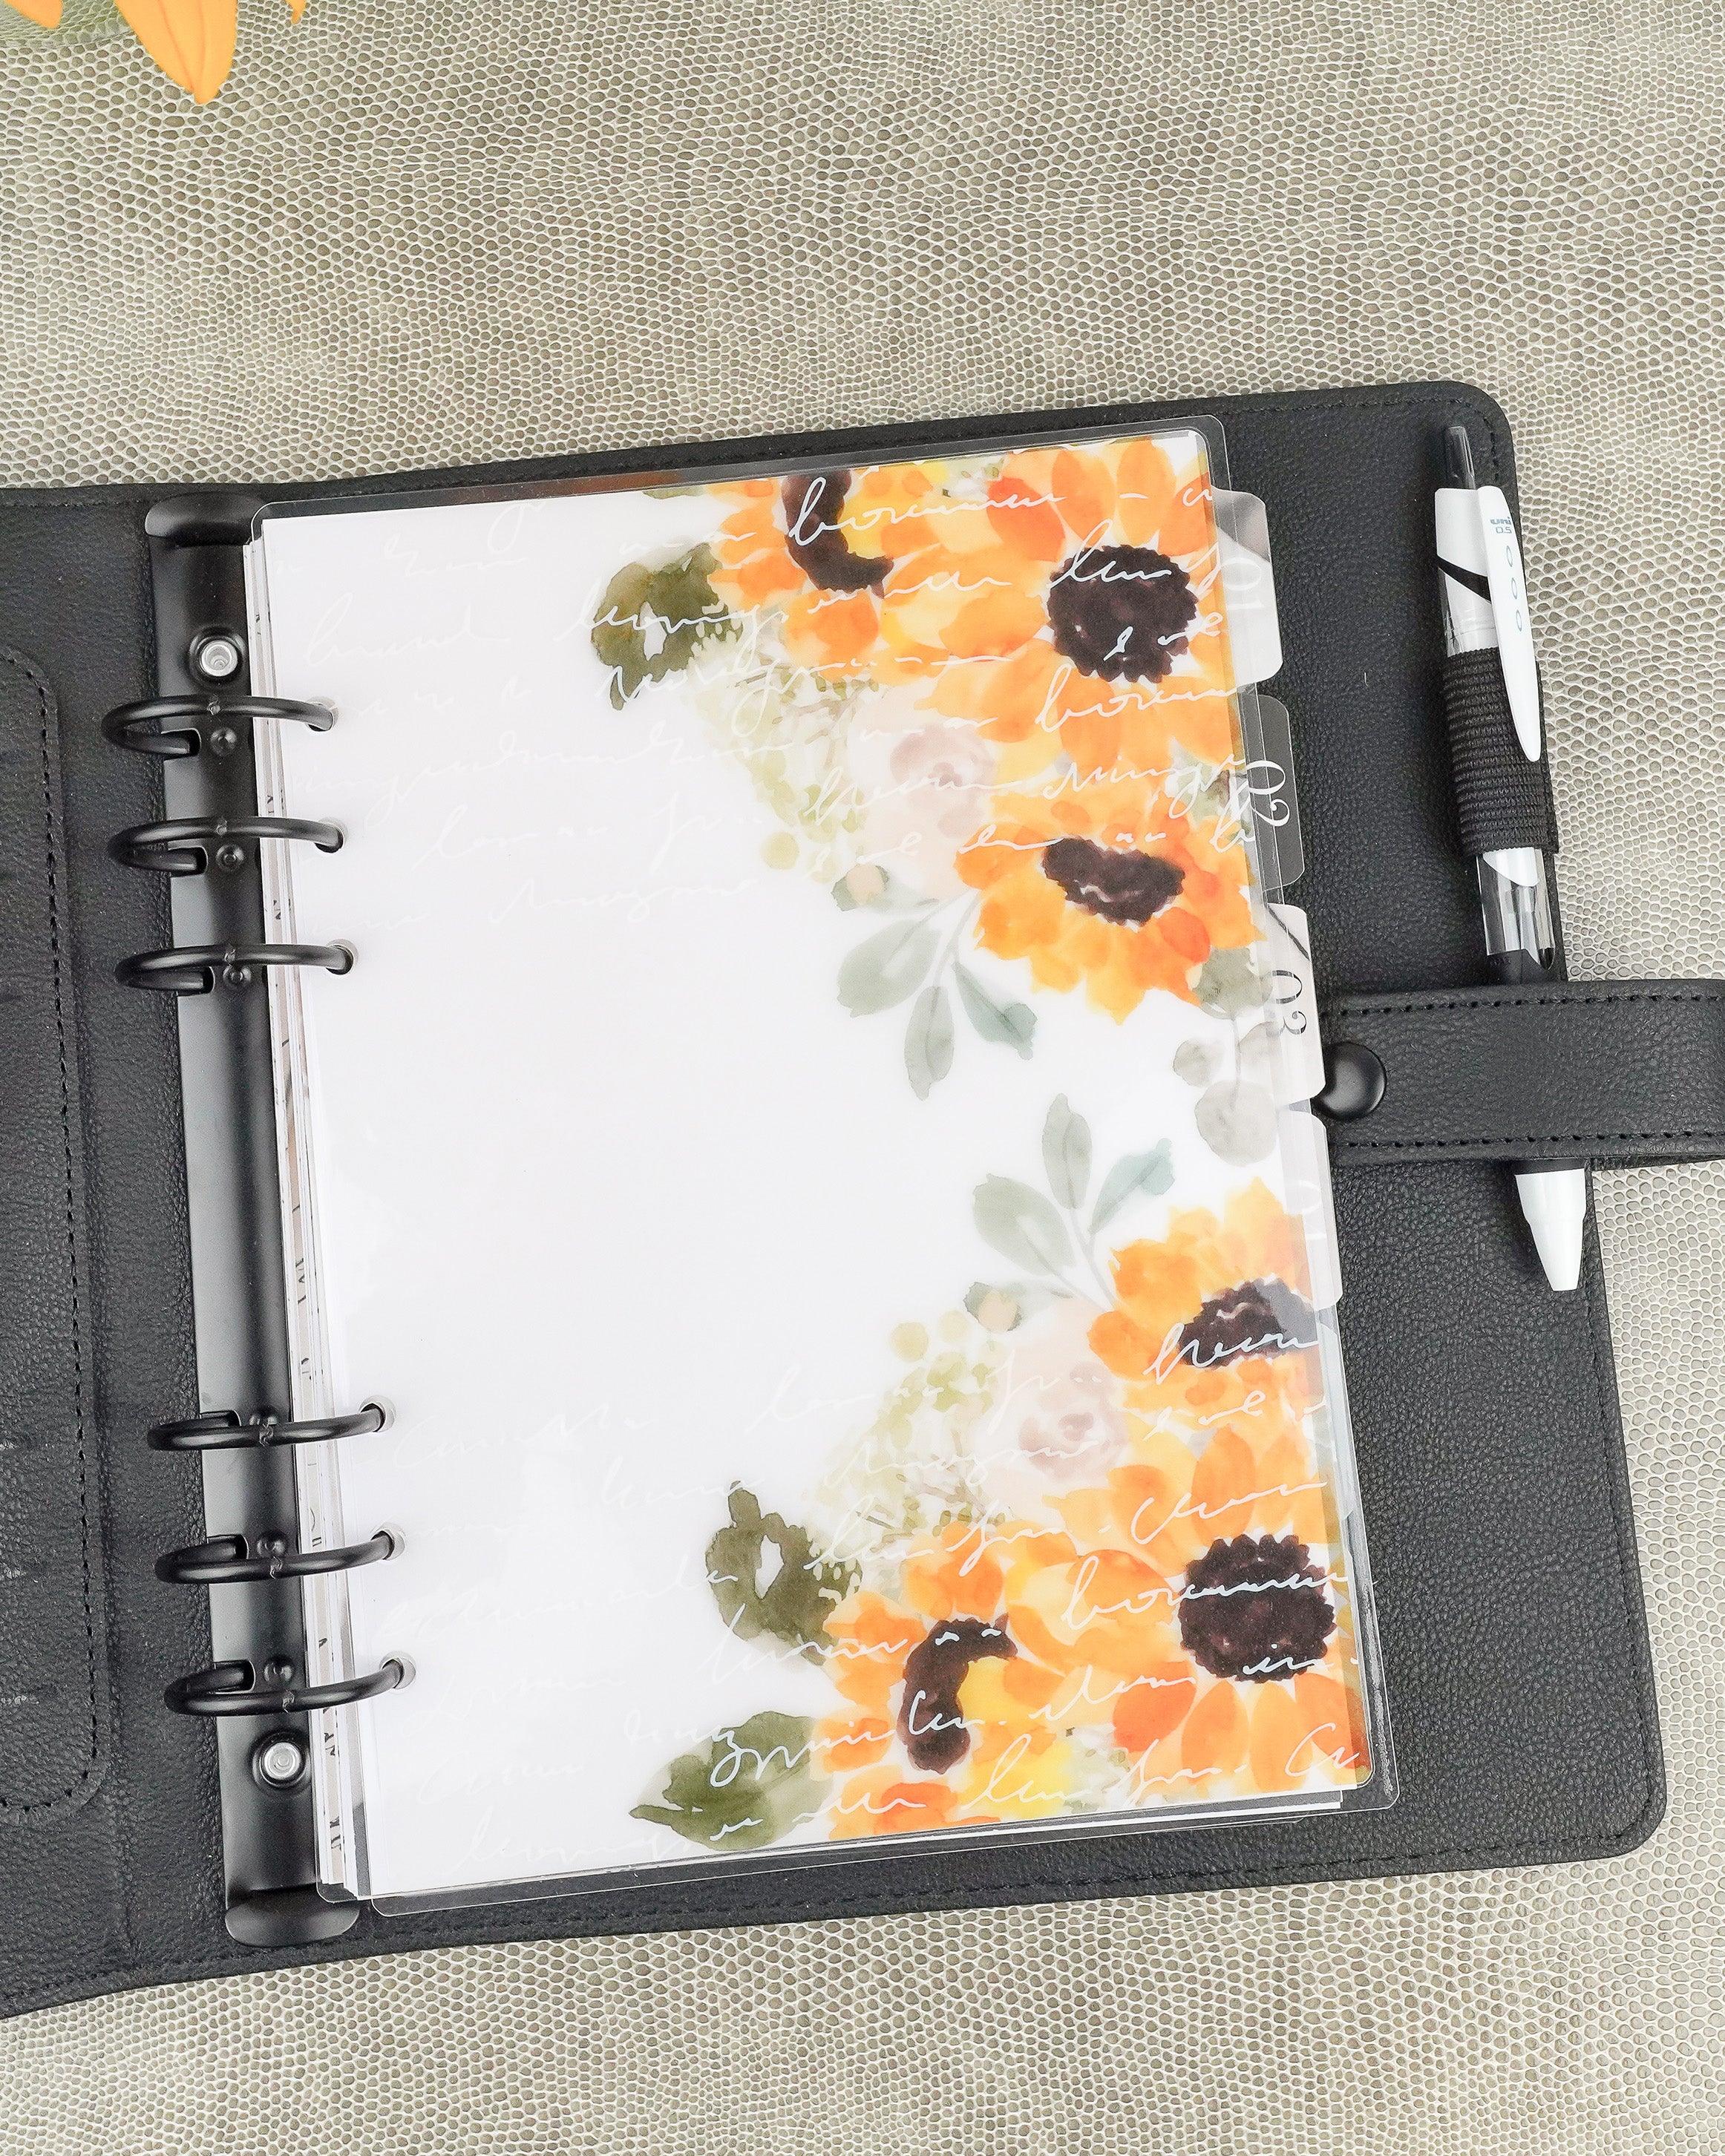 Laminated sunflower planner dashboard for six ring and discbound planner systems by Jane's Agenda®.